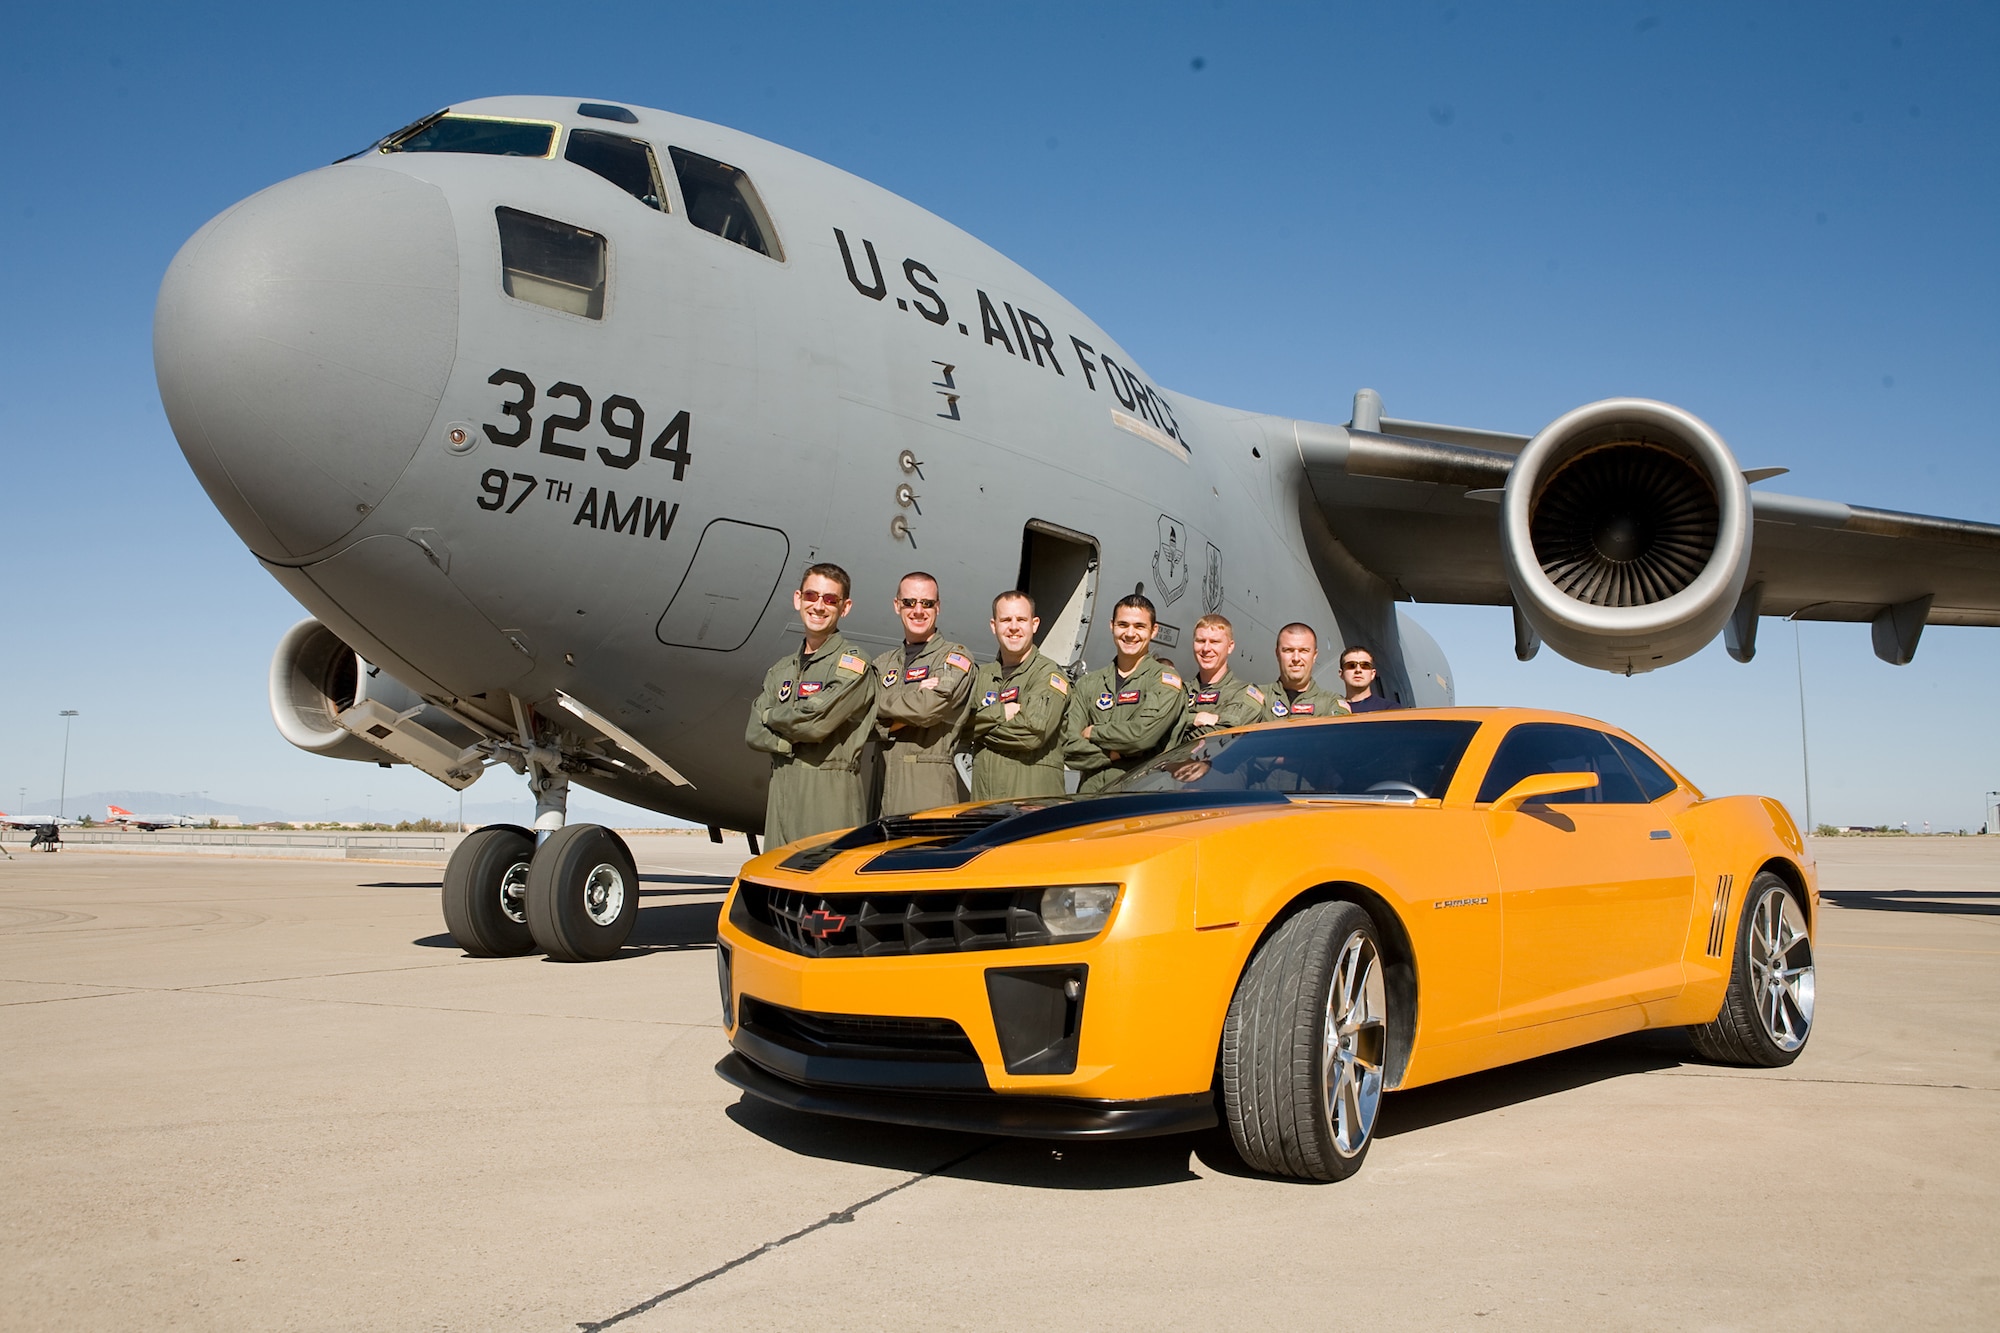 ALTUS AIR FORCE BASE, Okla. -- Aircrews from the 97th Air Mobility Wing pose next to the car used during filming of "Transformers: Revenge of the Fallen." The Airmen were extras in the movie and lent their military expertise to production crews. (Courtesy photo, copyright 2009 Paramount Pictures)